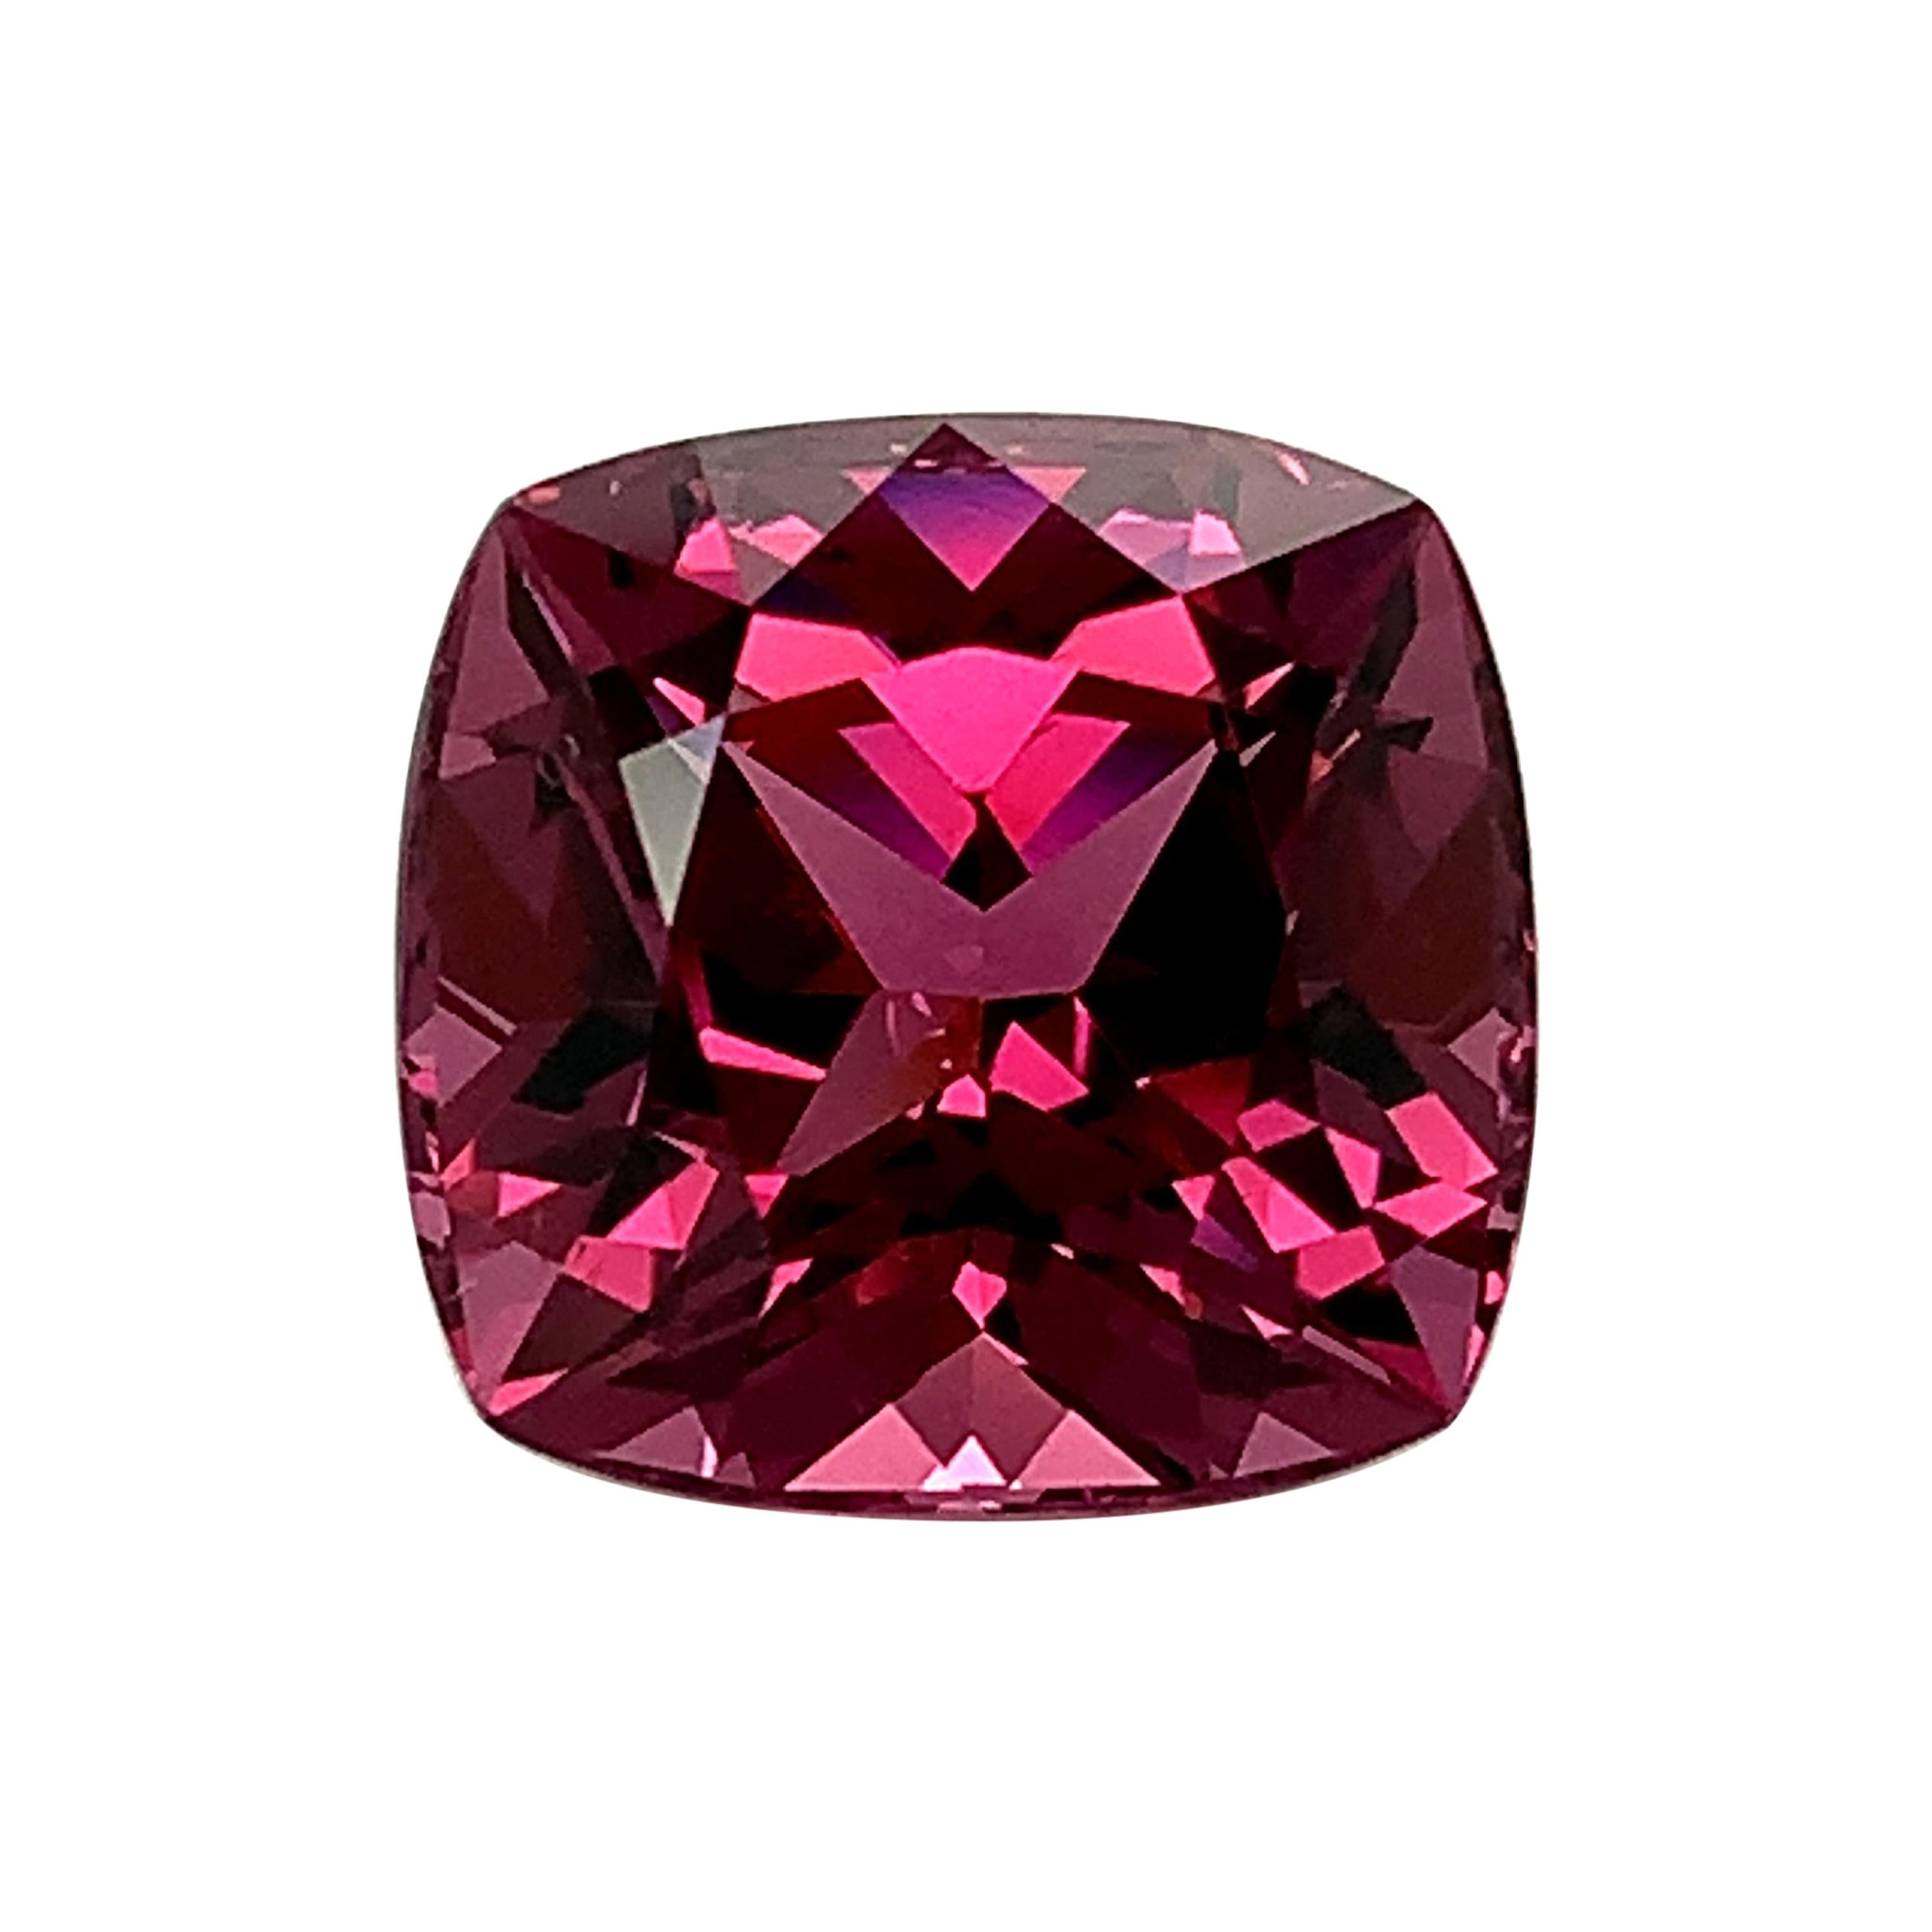 Unheated 9.26 Carat Purple Pink Spinel Cushion, Loose Gemstone, GIA Certified .A